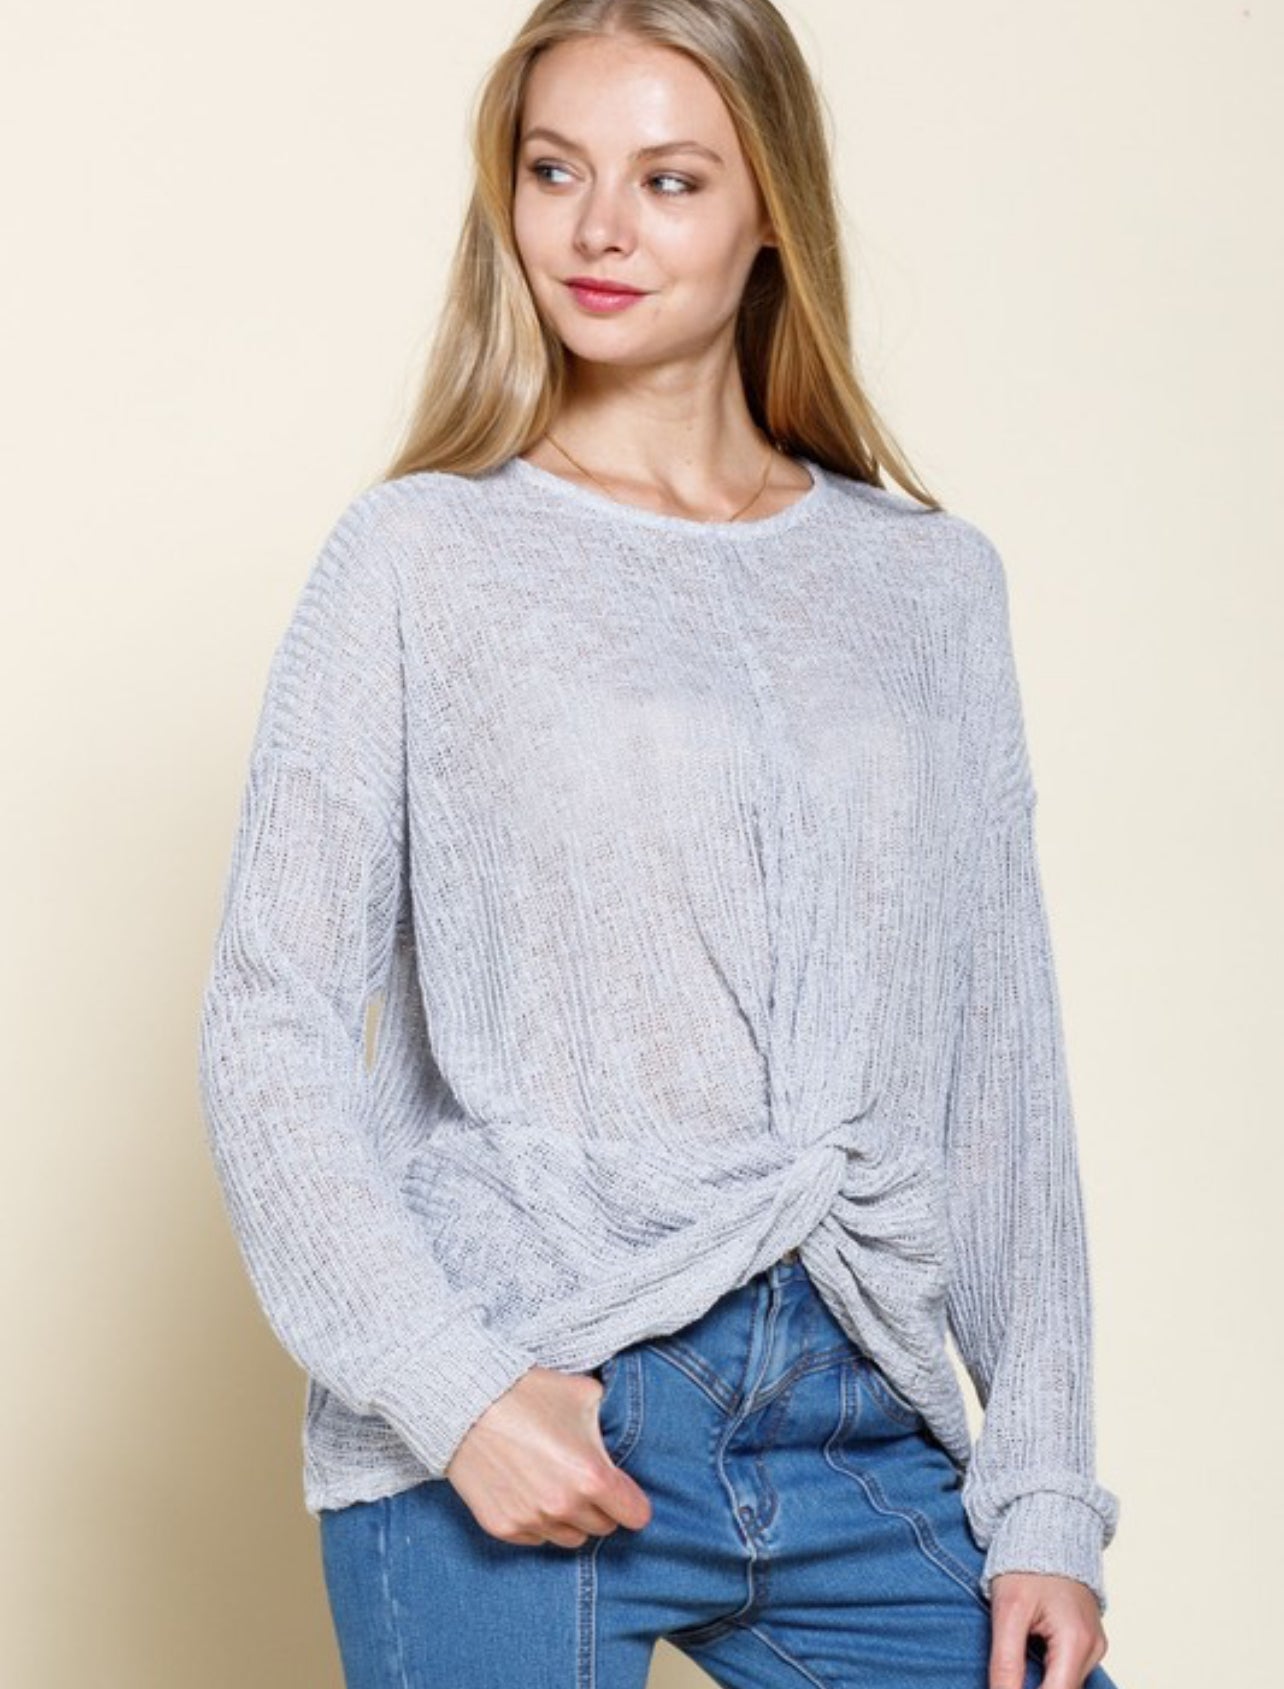 Twisted front knit top